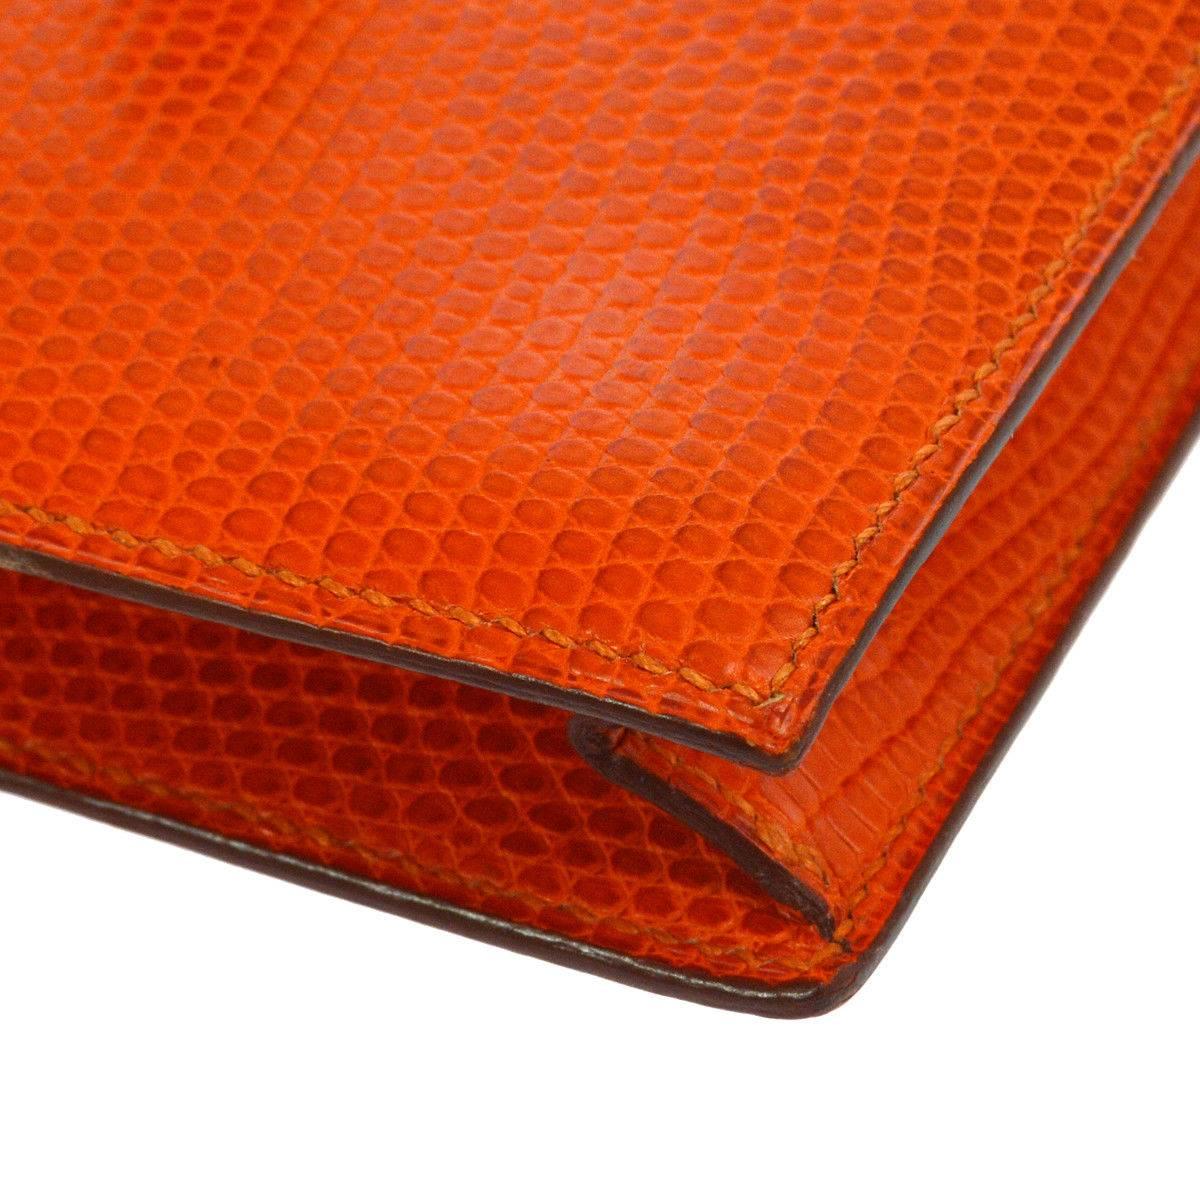 Hermes Limited Edition Lizard Leather Envelope Evening Clutch Shoulder Flap Bag In Good Condition In Chicago, IL